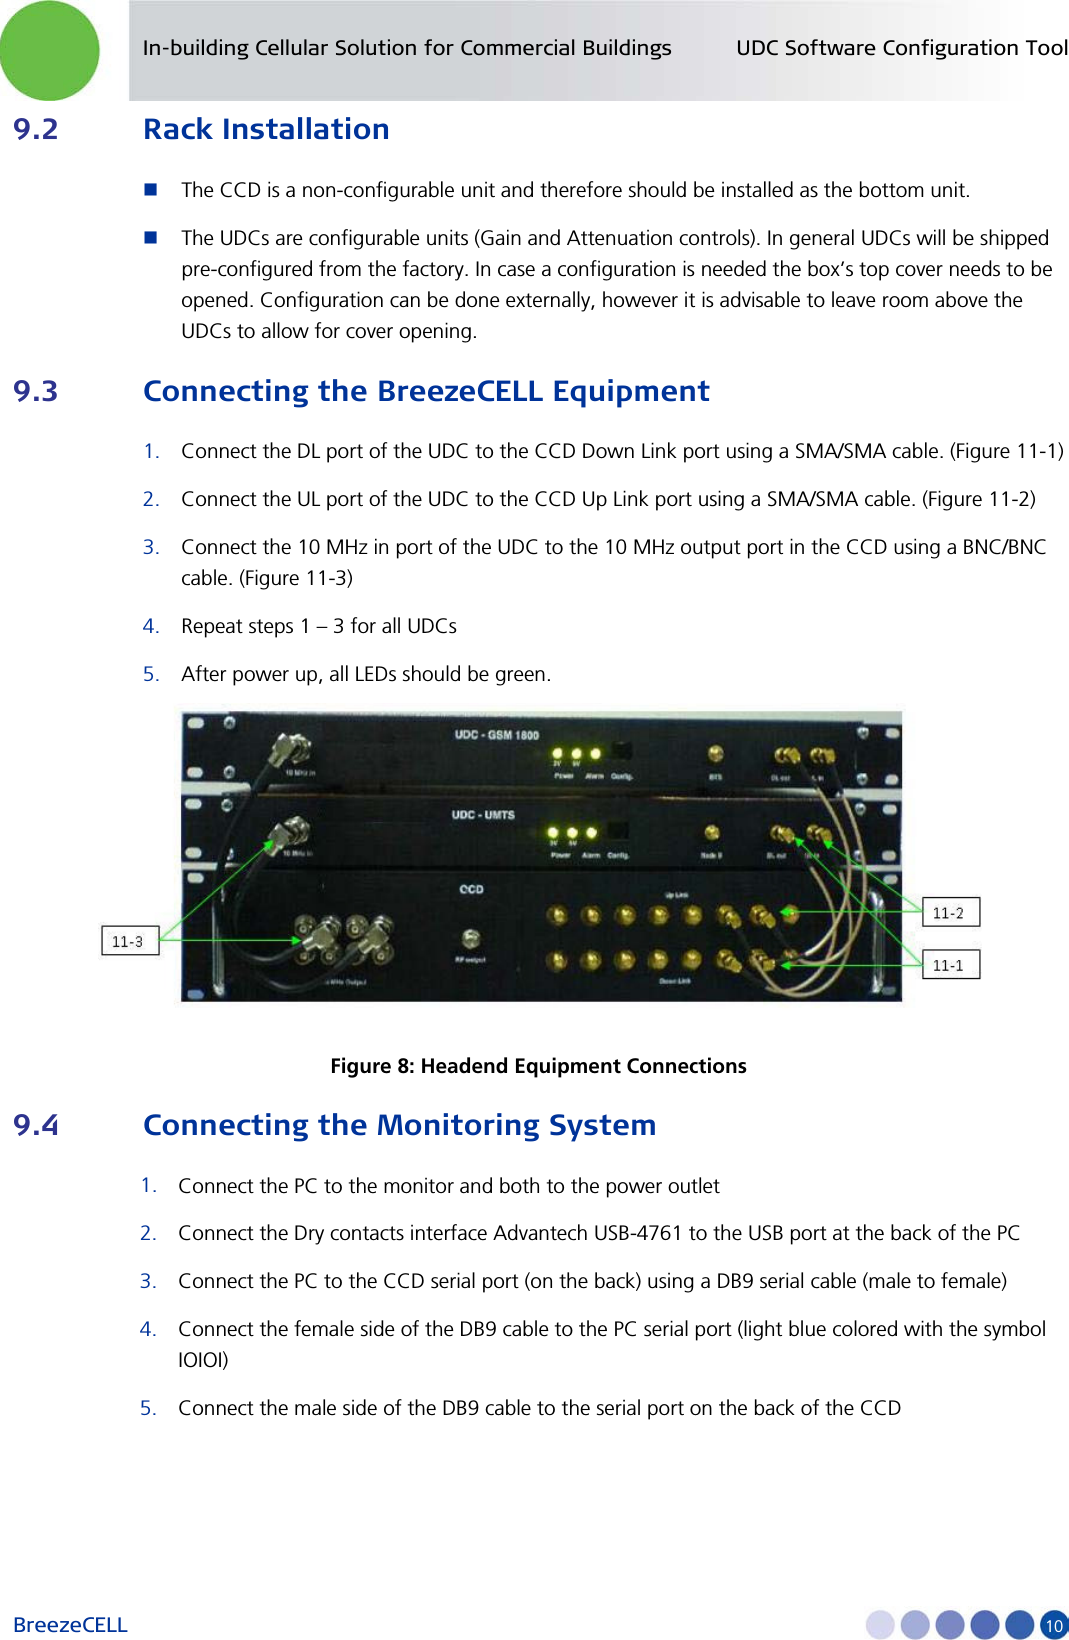 In-building Cellular Solution for Commercial Buildings UDC Software Configuration Tool BreezeCELL     10 9.2 Rack Installation  The CCD is a non-configurable unit and therefore should be installed as the bottom unit.  The UDCs are configurable units (Gain and Attenuation controls). In general UDCs will be shipped pre-configured from the factory. In case a configuration is needed the box’s top cover needs to be opened. Configuration can be done externally, however it is advisable to leave room above the UDCs to allow for cover opening. 9.3 Connecting the BreezeCELL Equipment 1. Connect the DL port of the UDC to the CCD Down Link port using a SMA/SMA cable. (Figure 11-1) 2. Connect the UL port of the UDC to the CCD Up Link port using a SMA/SMA cable. (Figure 11-2) 3. Connect the 10 MHz in port of the UDC to the 10 MHz output port in the CCD using a BNC/BNC cable. (Figure 11-3) 4. Repeat steps 1 – 3 for all UDCs 5. After power up, all LEDs should be green.  Figure 8: Headend Equipment Connections 9.4 Connecting the Monitoring System 1. Connect the PC to the monitor and both to the power outlet 2. Connect the Dry contacts interface Advantech USB-4761 to the USB port at the back of the PC 3. Connect the PC to the CCD serial port (on the back) using a DB9 serial cable (male to female) 4. Connect the female side of the DB9 cable to the PC serial port (light blue colored with the symbol IOIOI) 5. Connect the male side of the DB9 cable to the serial port on the back of the CCD 